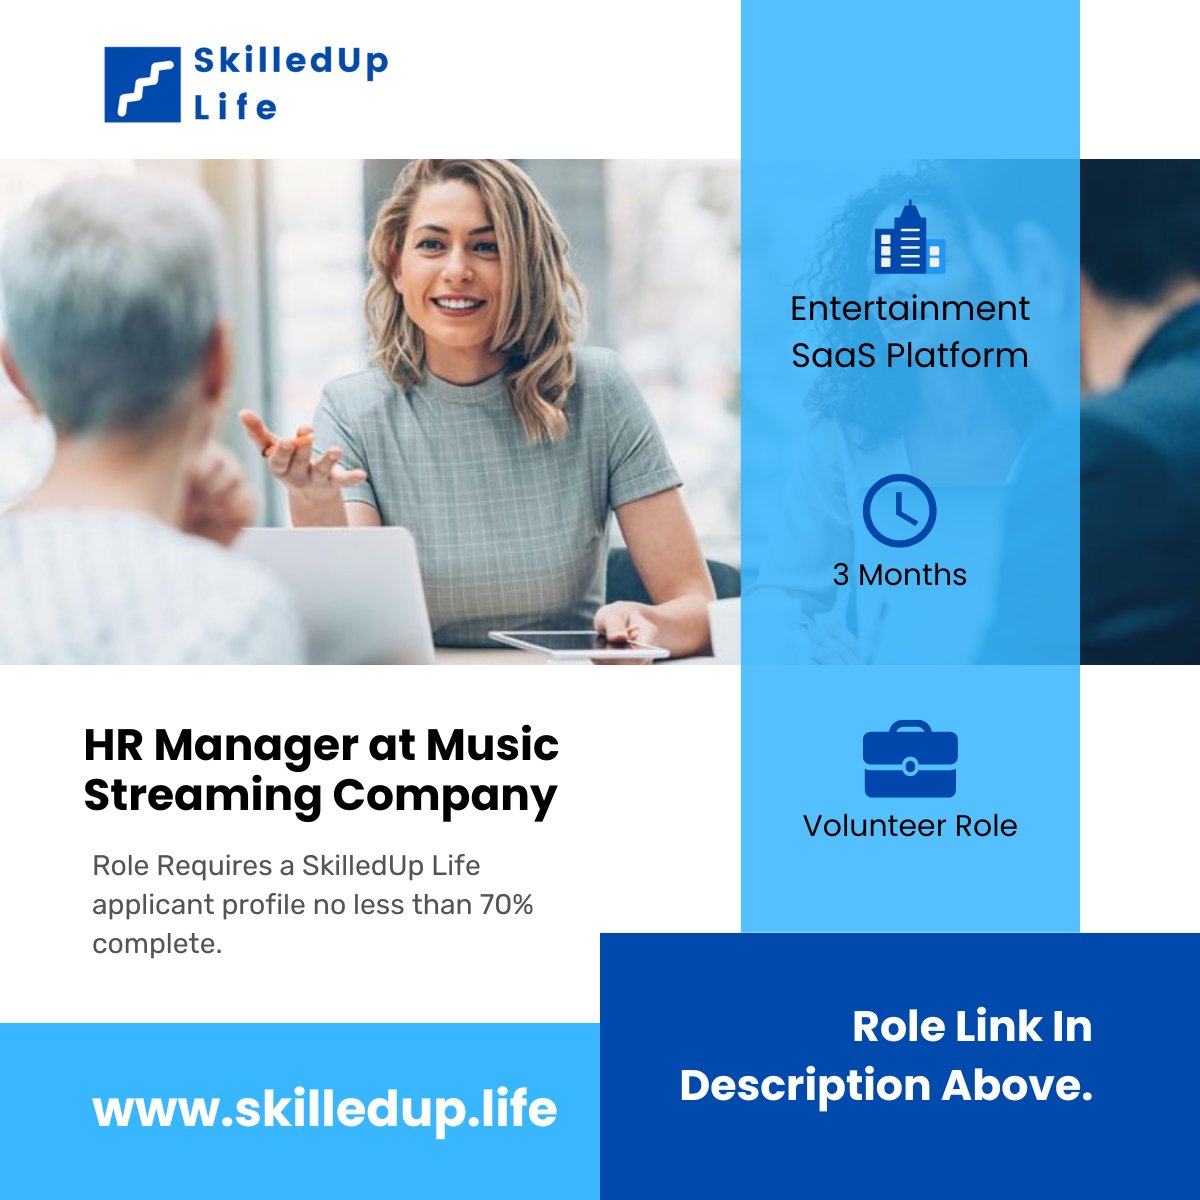 🌟 Calling all HR professionals! 7thCentury Media Group Ltd is looking for a Volunteer HR Manager. Join and play a crucial role in building a strong, people-centric culture. Apply now! skilledup.life/opportunity/7t… #VolunteerOpportunity #HRManager #SkilledUpLife #RemoteVolunteer